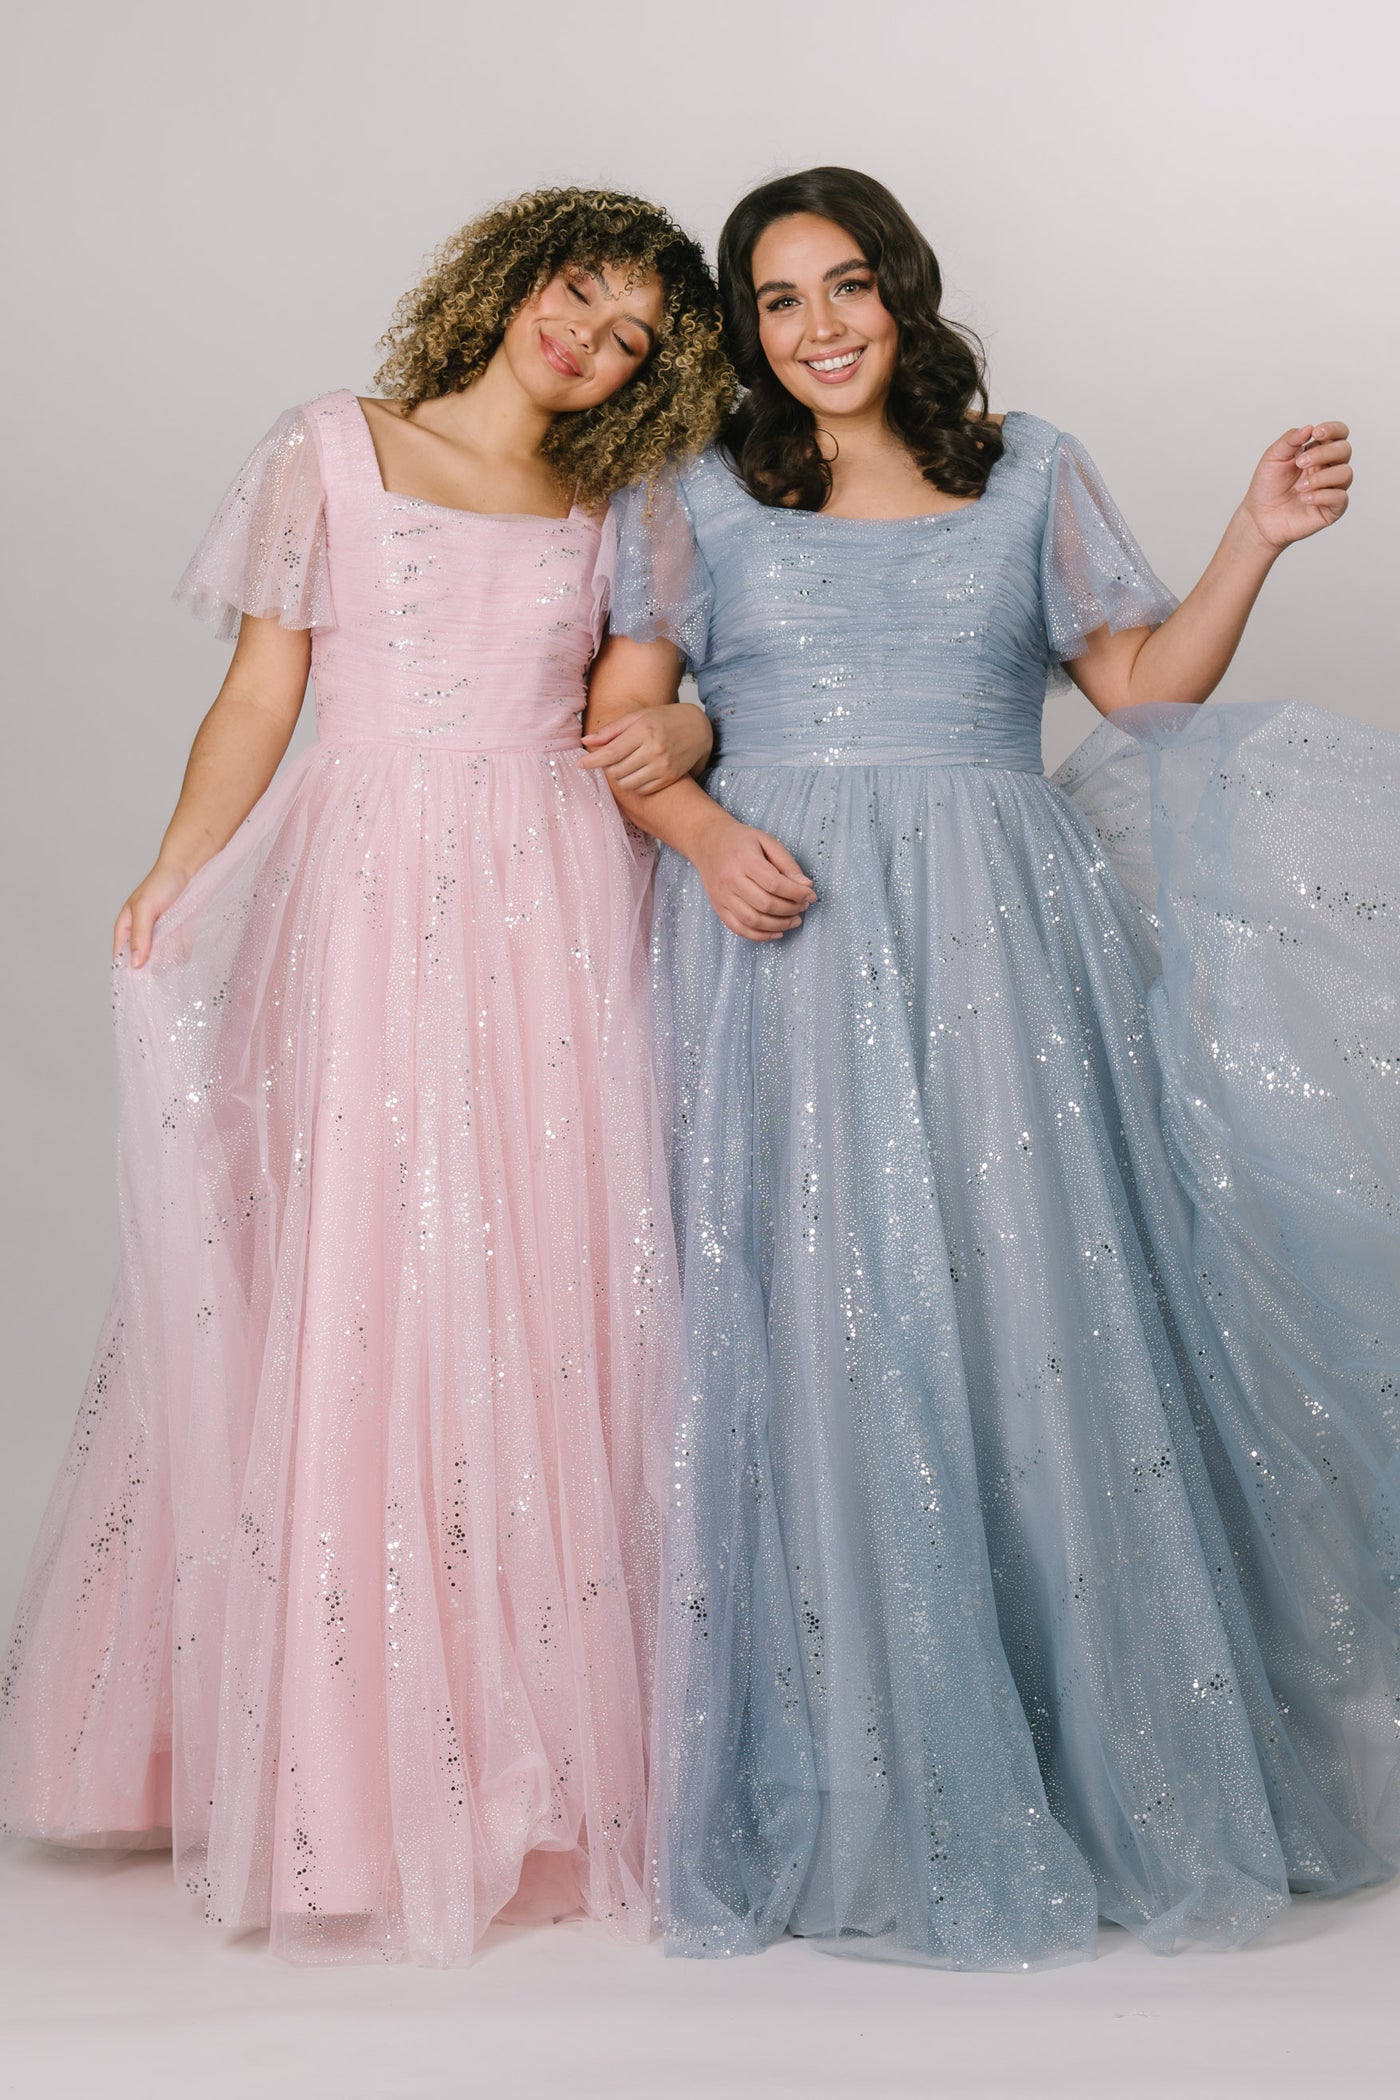 Modest Dresses - Modest Prom Dress - Formalwear Modest Dresses - Bridesmaid Modest Dresses. Two ballgown dresses side by side in Pink and blue.